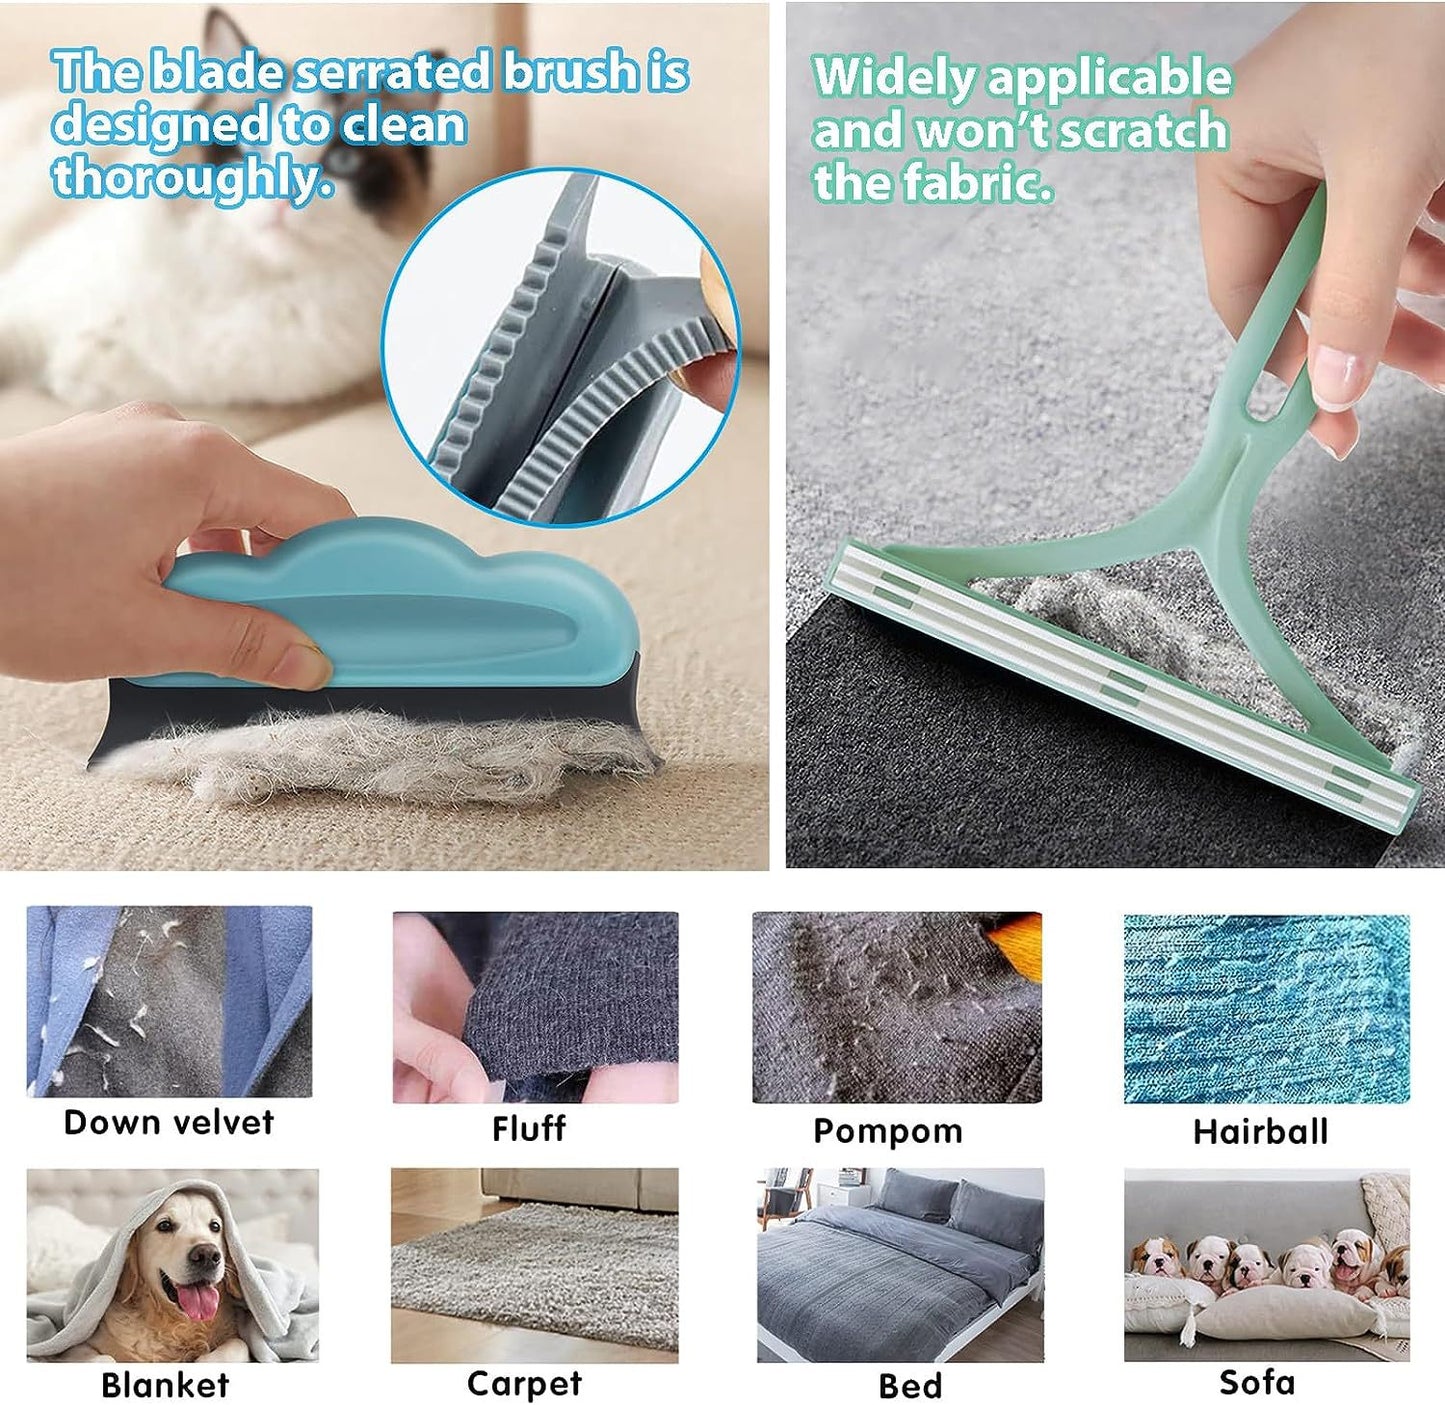 Cat Hair Cleaner Pet Hair Shaver Bed Carpet Hair Remover Suction Device Cat And Dog Hair Sticky Device